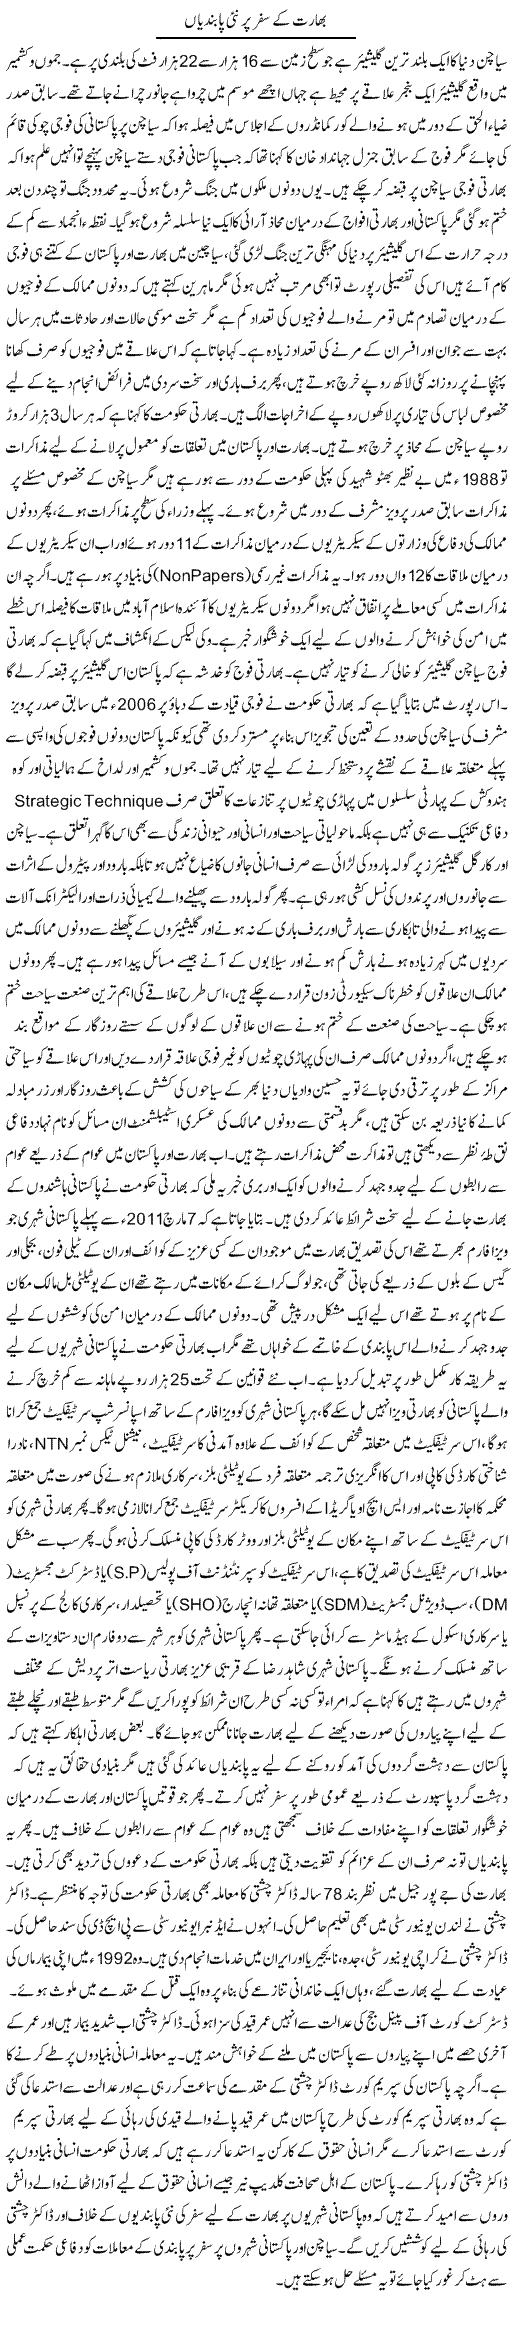 India's Journey Express Column Tauseef Ahmed 4 June 2011